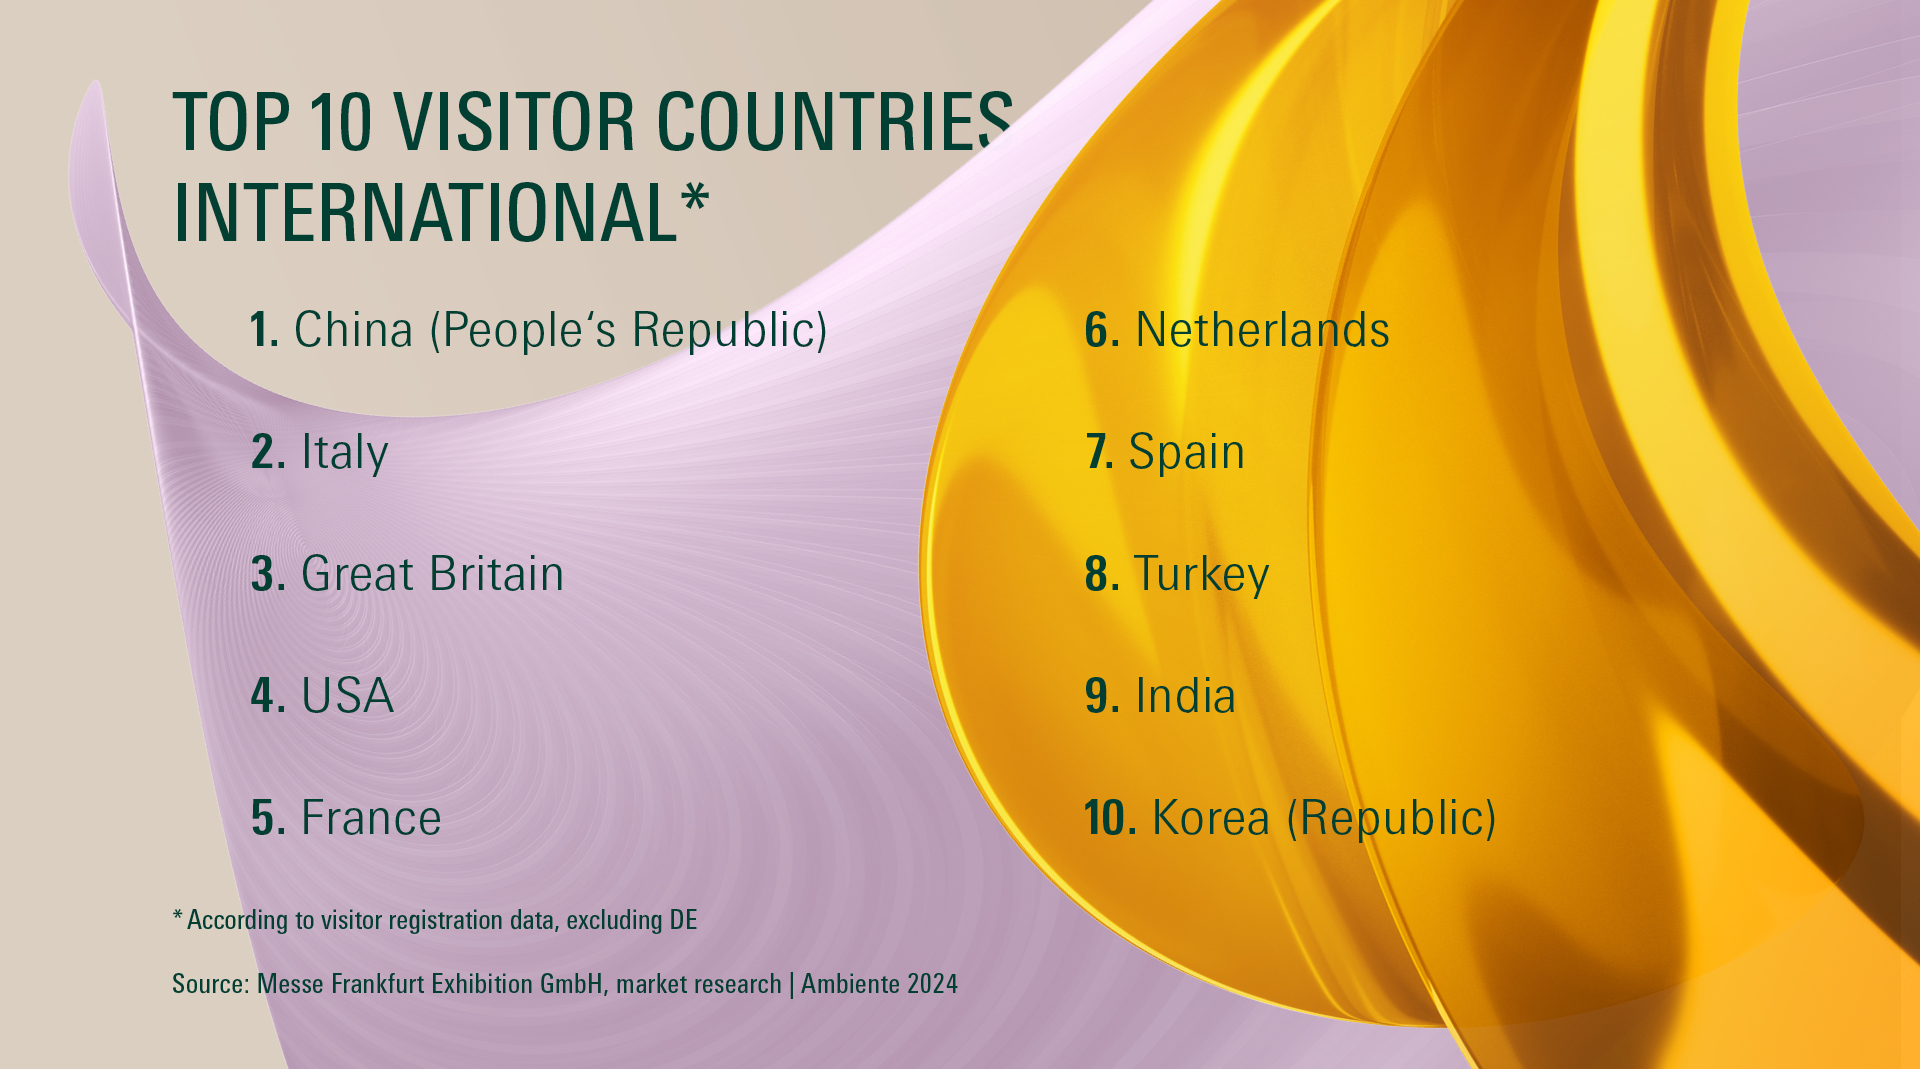 Ambiente 2024: Top 10 visitor countries international